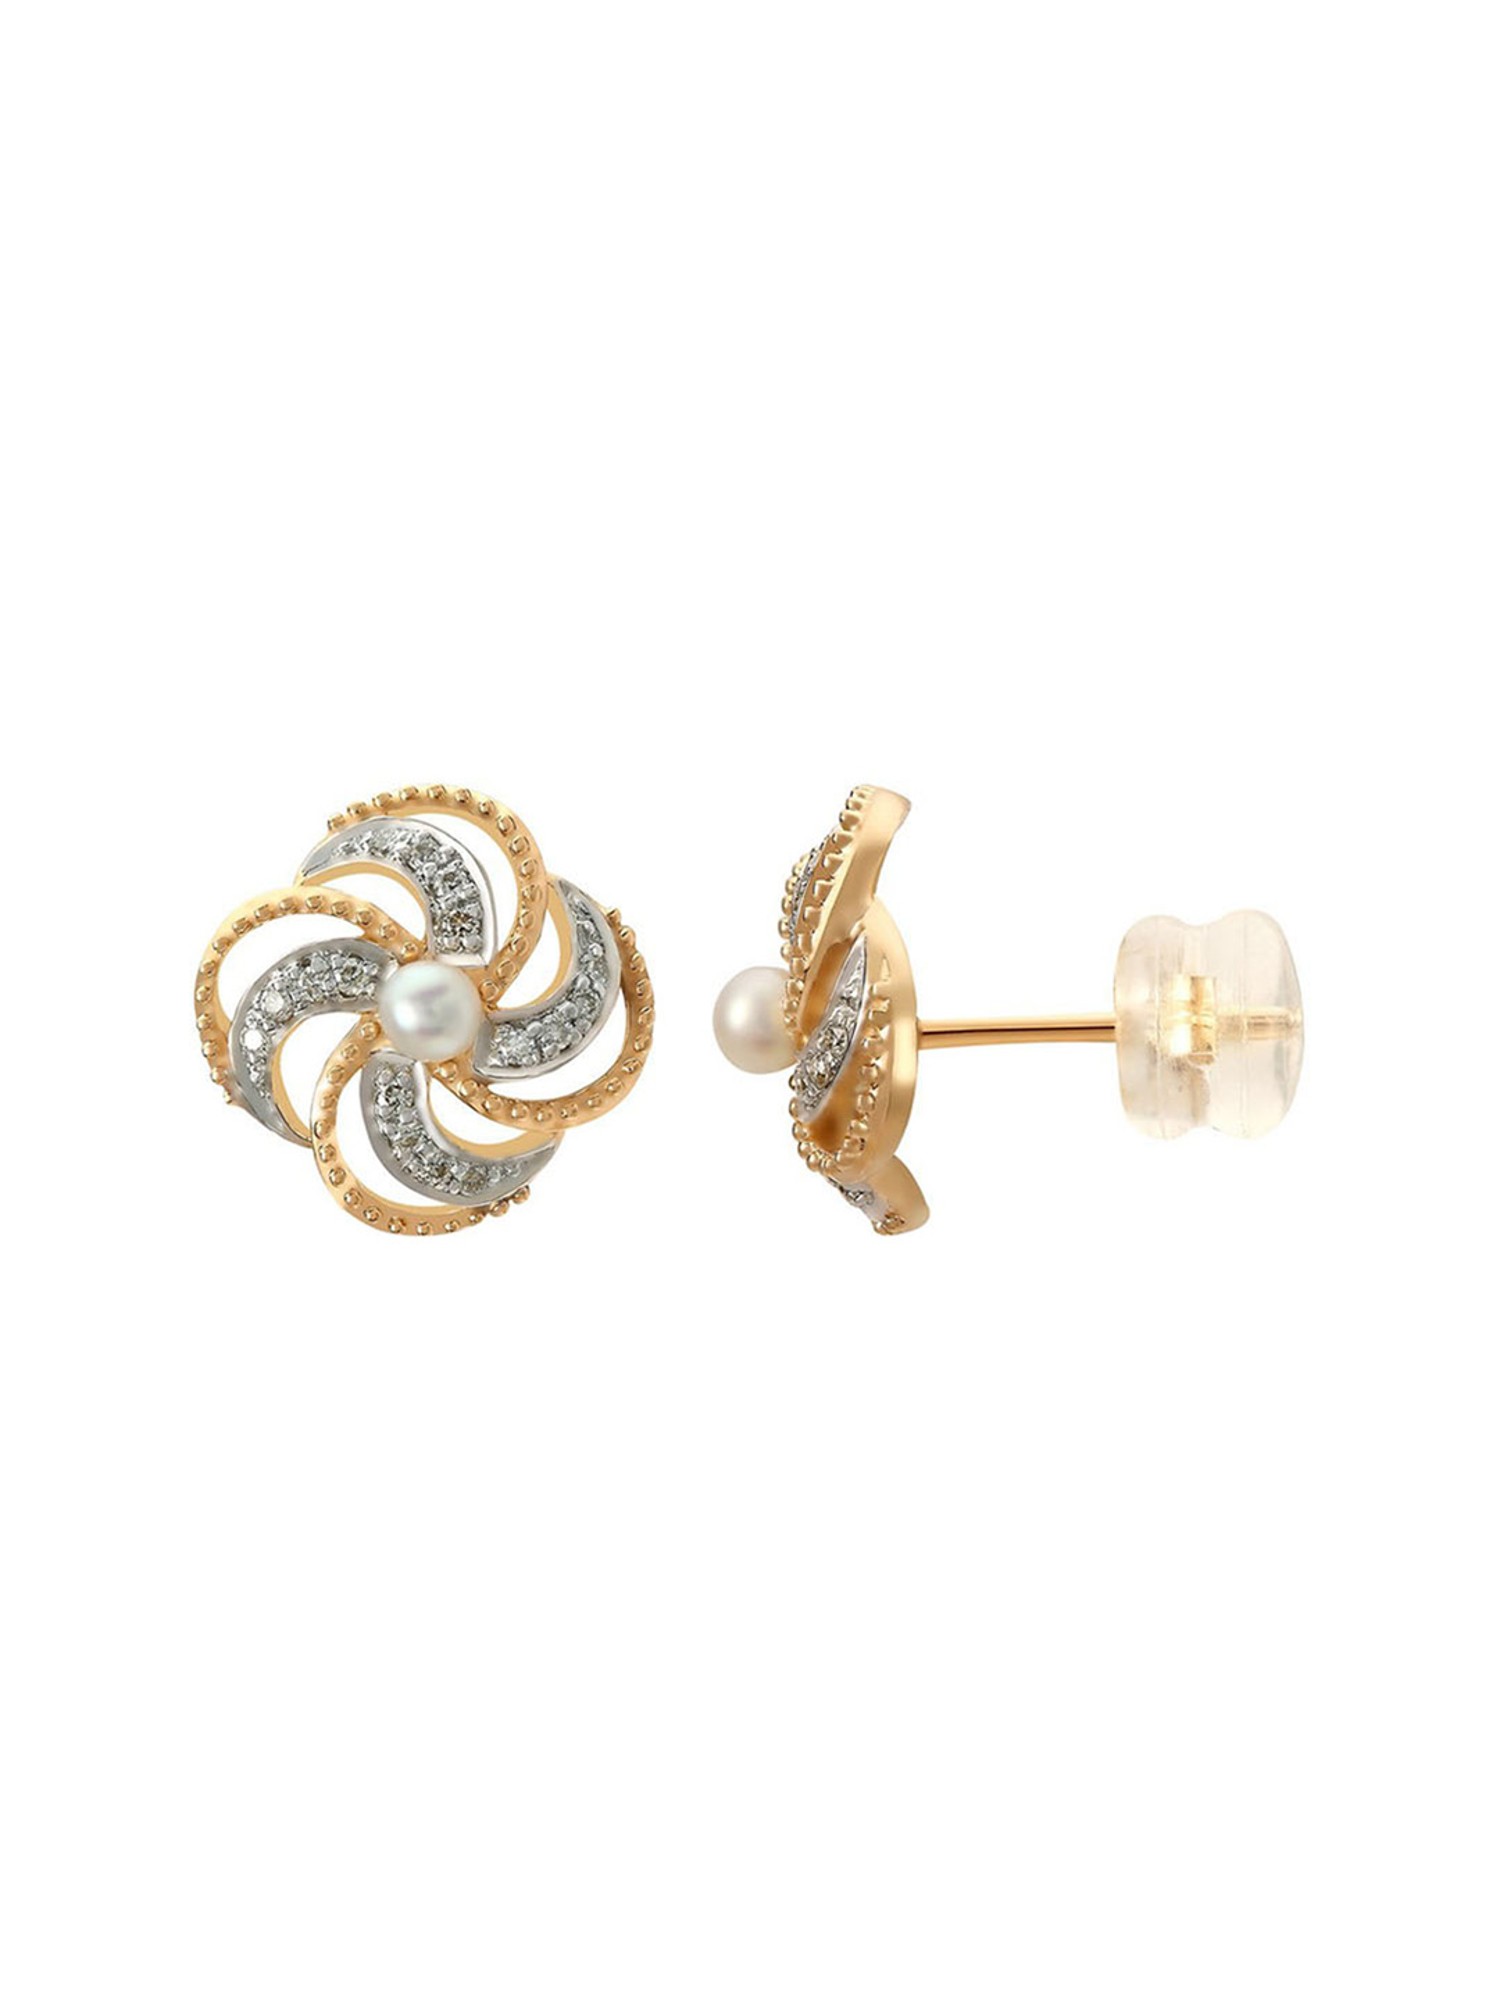 Buy Mia by Tanishq Cosmic Explosion Star 14k Gold Stud Earrings Online At  Best Price @ Tata CLiQ